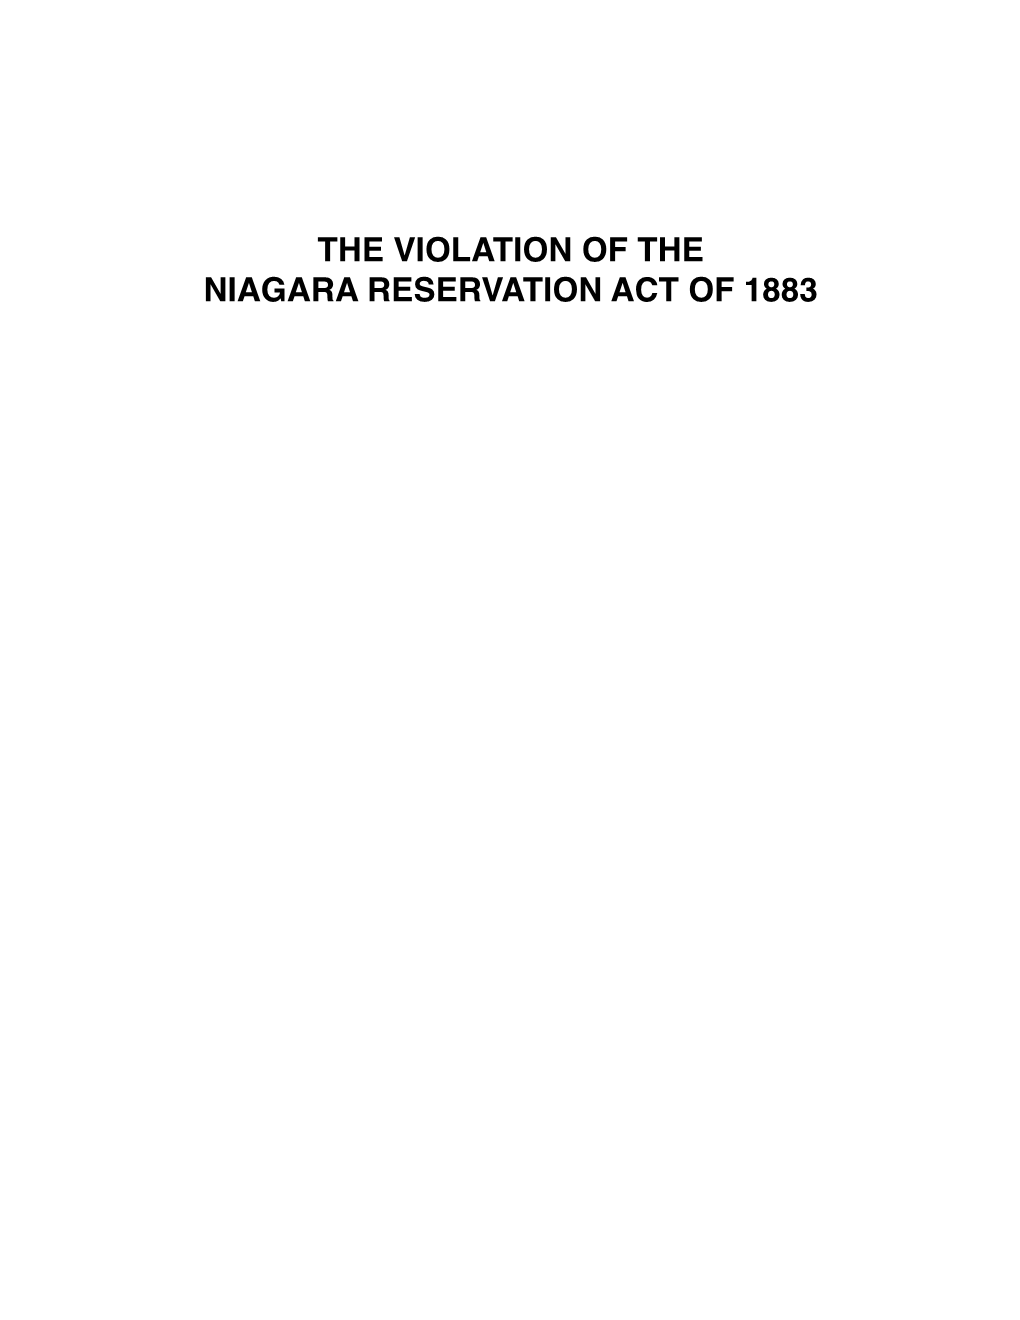 The Violation of the Niagara Reservation Act of 1883